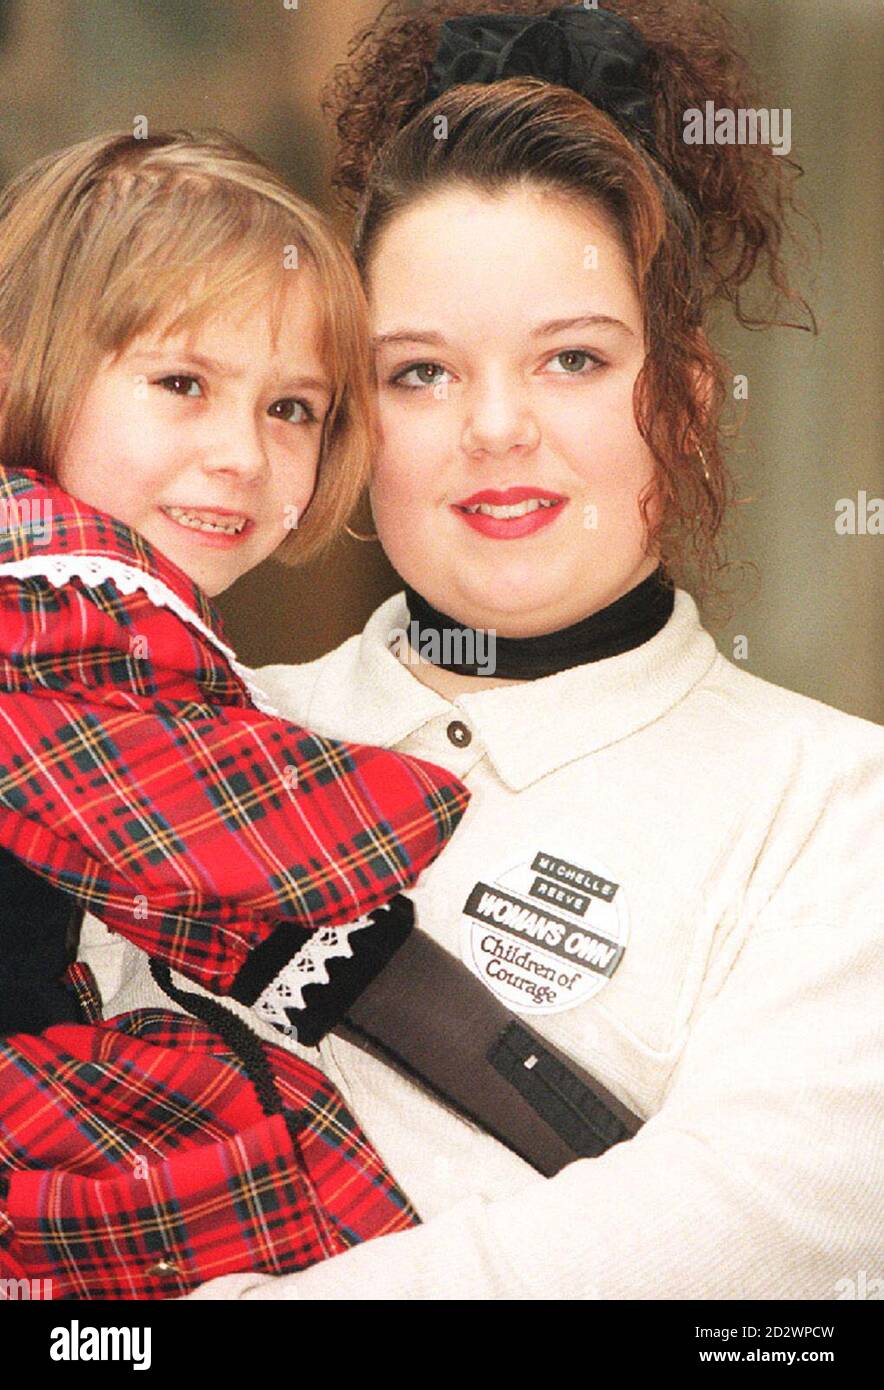 PAP 11: LONDON: 13.12.94: Michelle Reeve, 14, from Middlesbrough, who was stabbed 15 times when a masked knifeman took her class hostage and Abby Bamford, 7, from Lancashire, who suffered horrendous injuries when she was run over in August. Both children are part of the group of eight honoured at the Woman's Own Children of Courage Awards 1994, in London today (Tuesday). Abby lost her left ear, badly damaged her right arm and the damage to her legs was so serious that doctors though she would never walk again. Michelle also saw her friend killed by her attacker. See PA Story AWARDS Children. Stock Photo